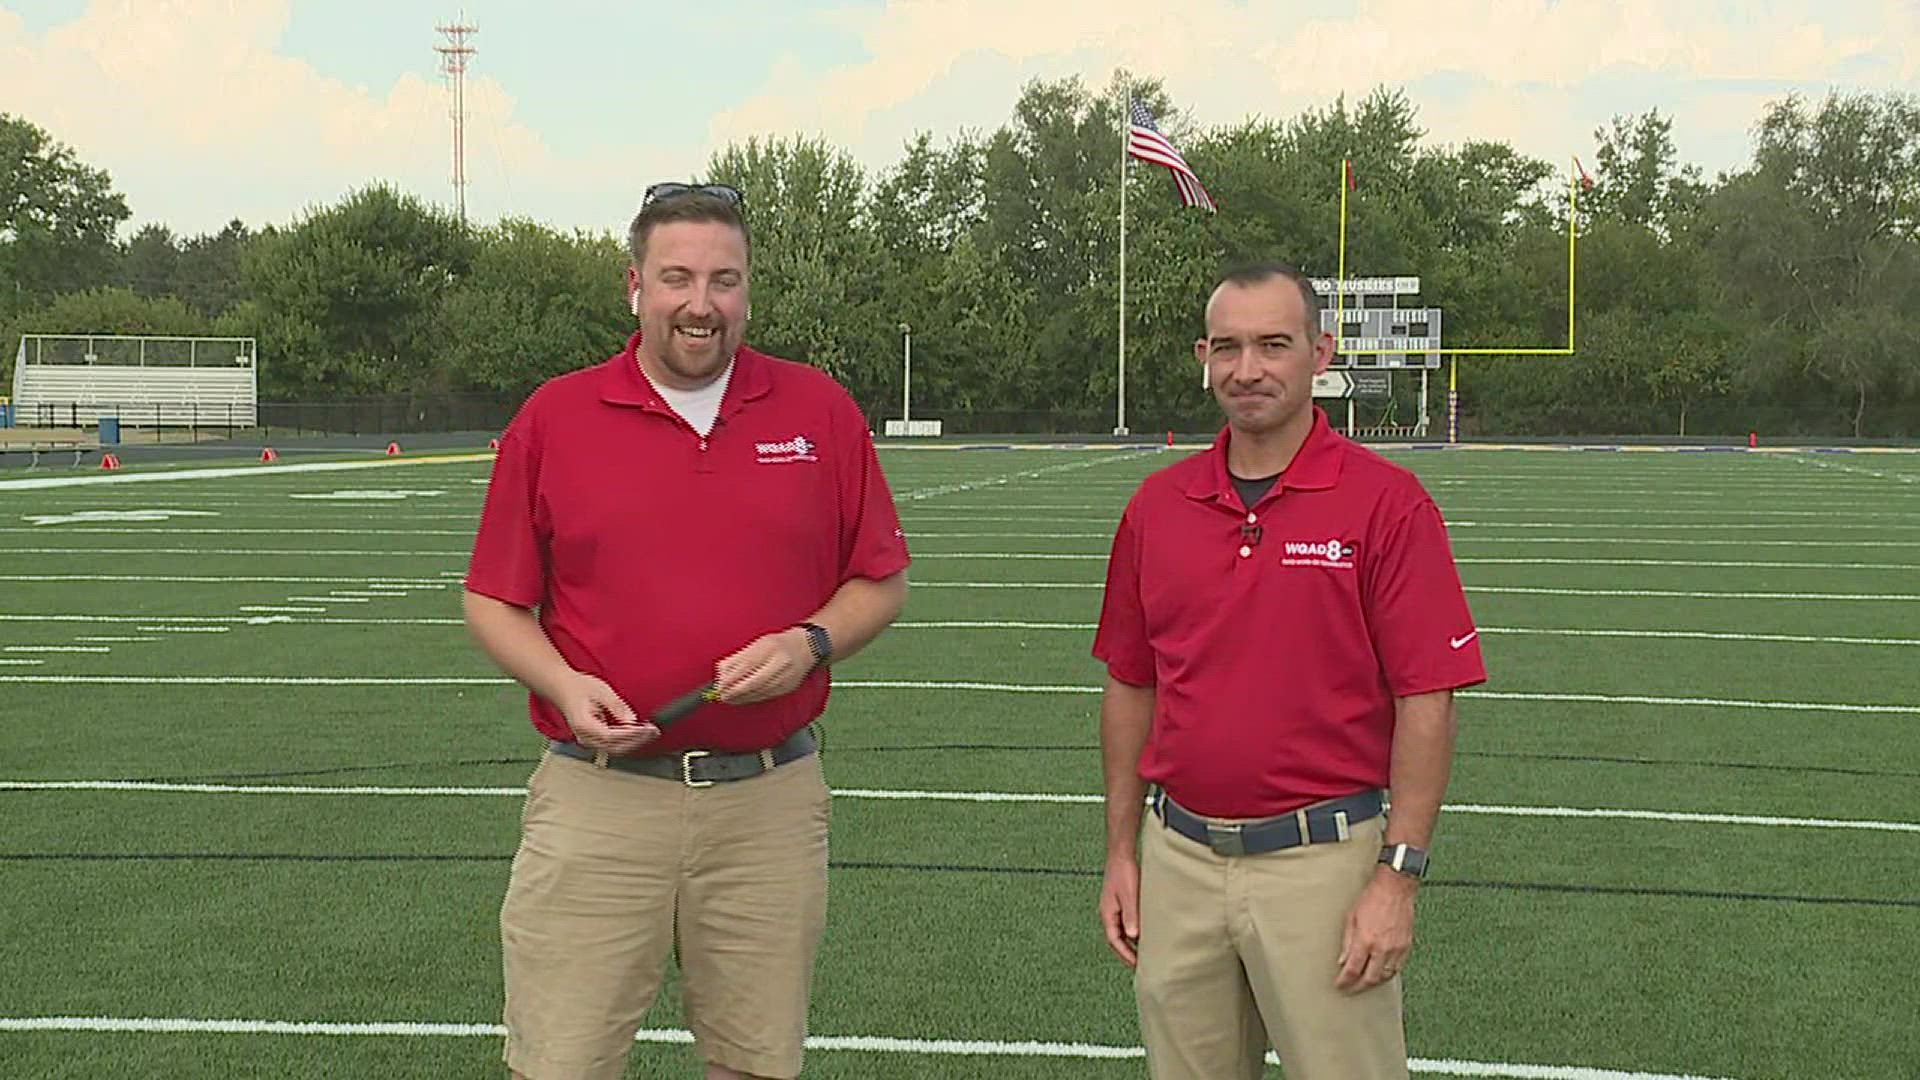 News 8 Senior Meteorologist Andrew Stutzke and Sports Reporter Kory Kuffler preview tonight's matchup between Pleasant Valley and Muscatine High School.